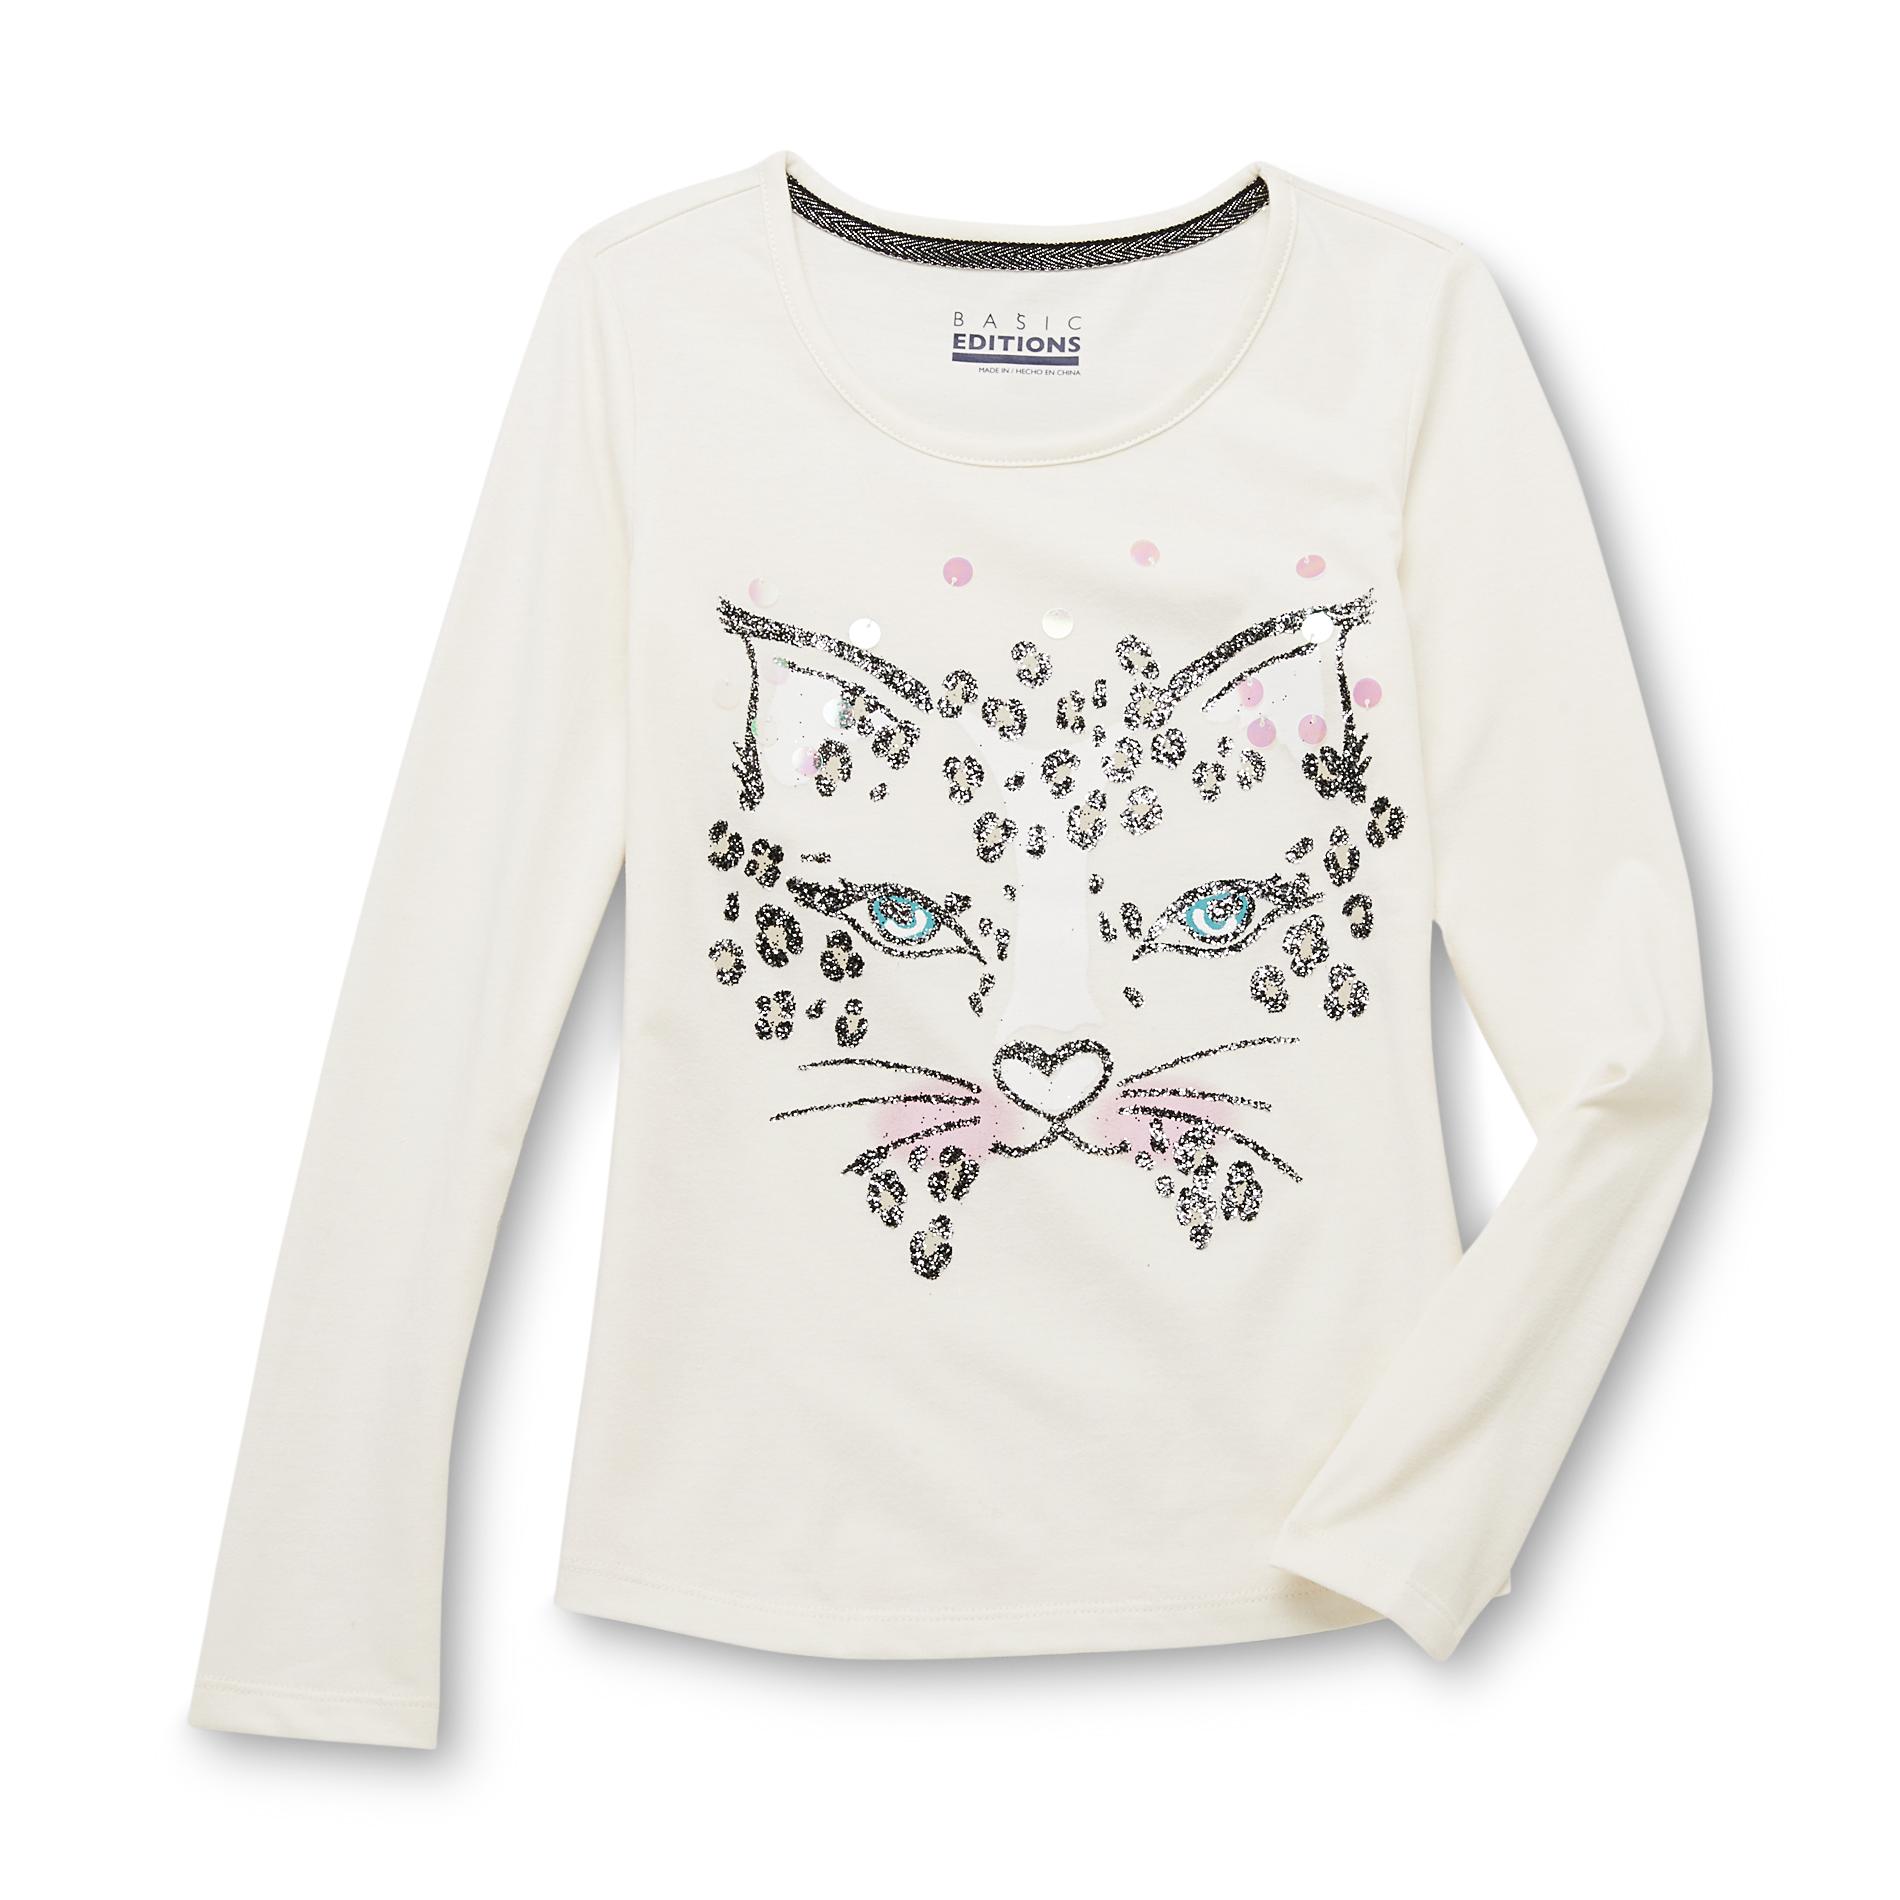 Basic Editions Girl's Graphic Top - Leopard